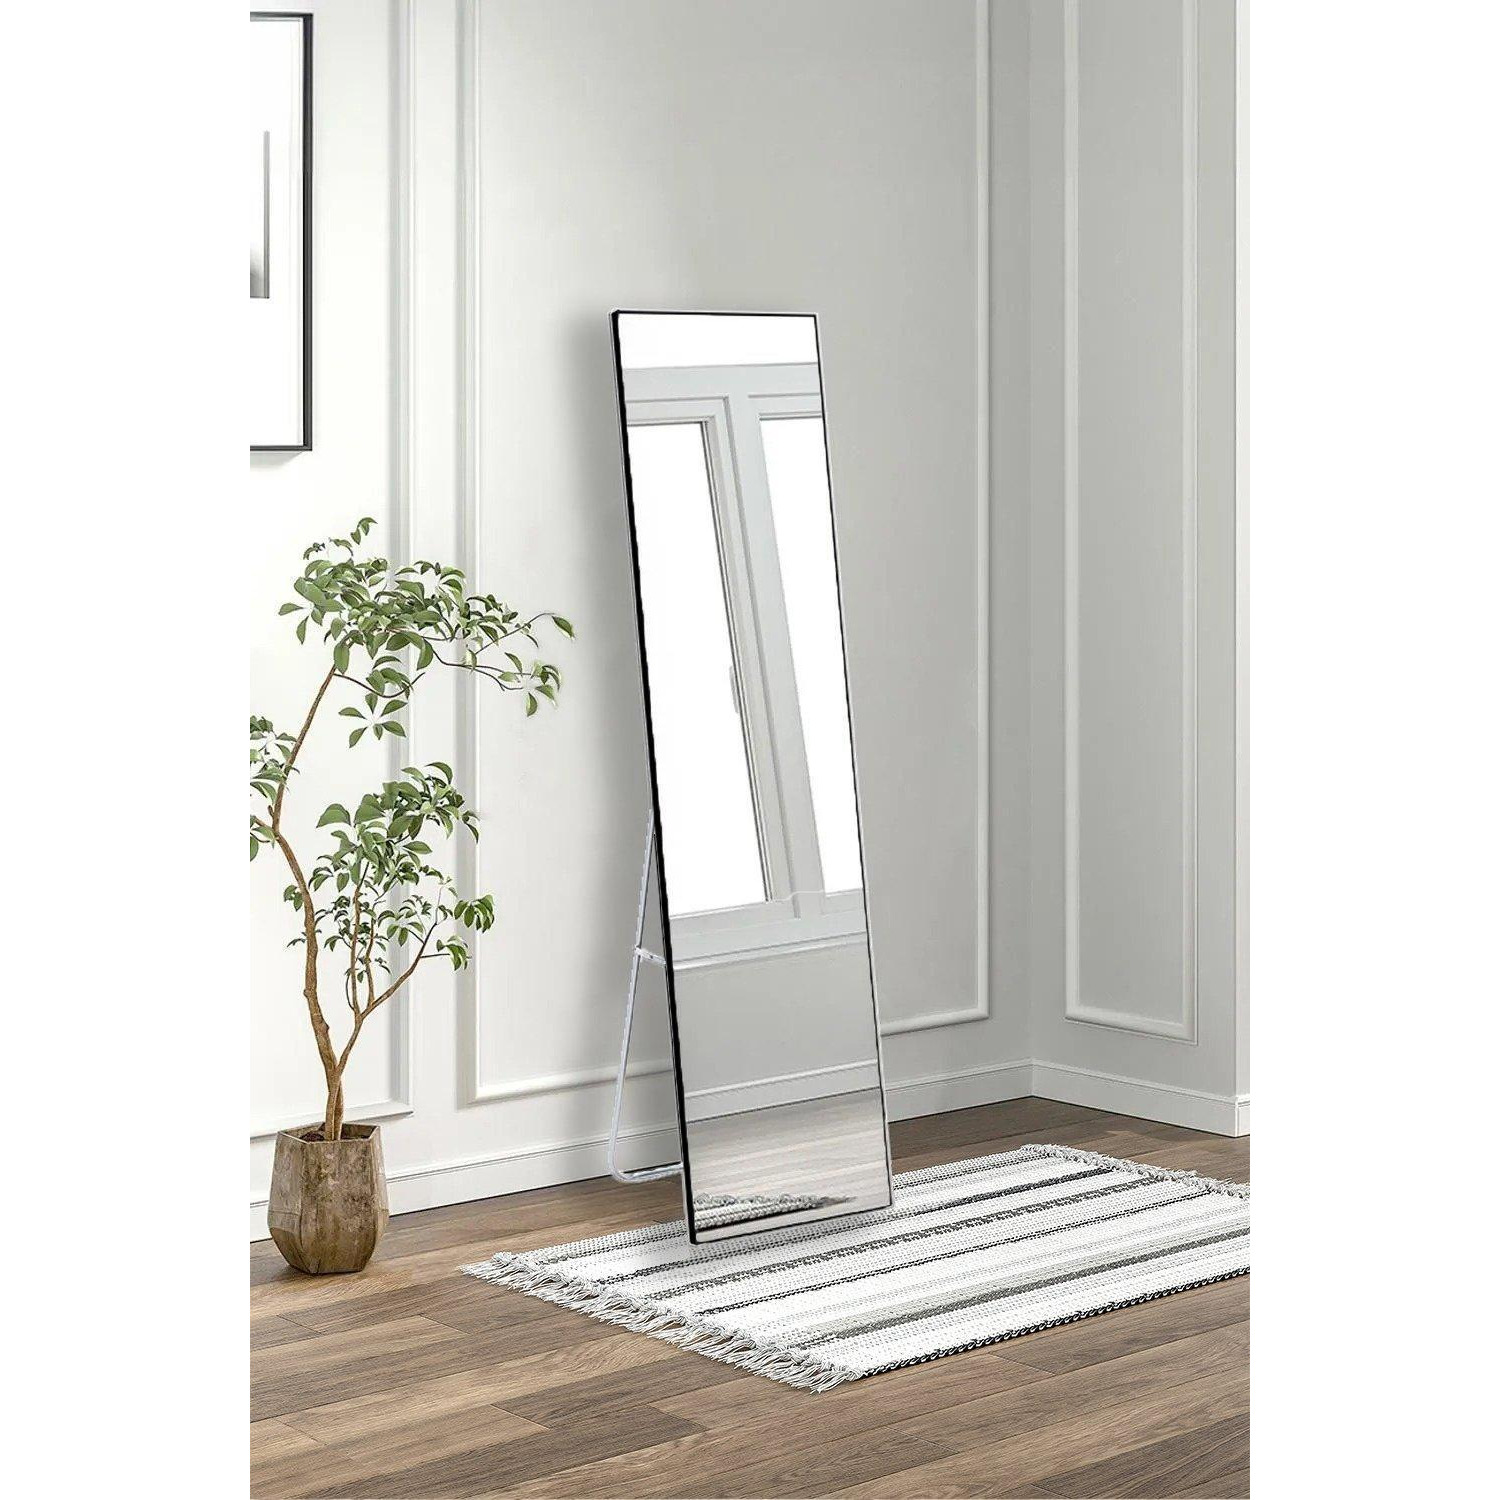 40cm W x 150cm H Black Rectangle Floor Mirror with Thin Metal Frame - image 1